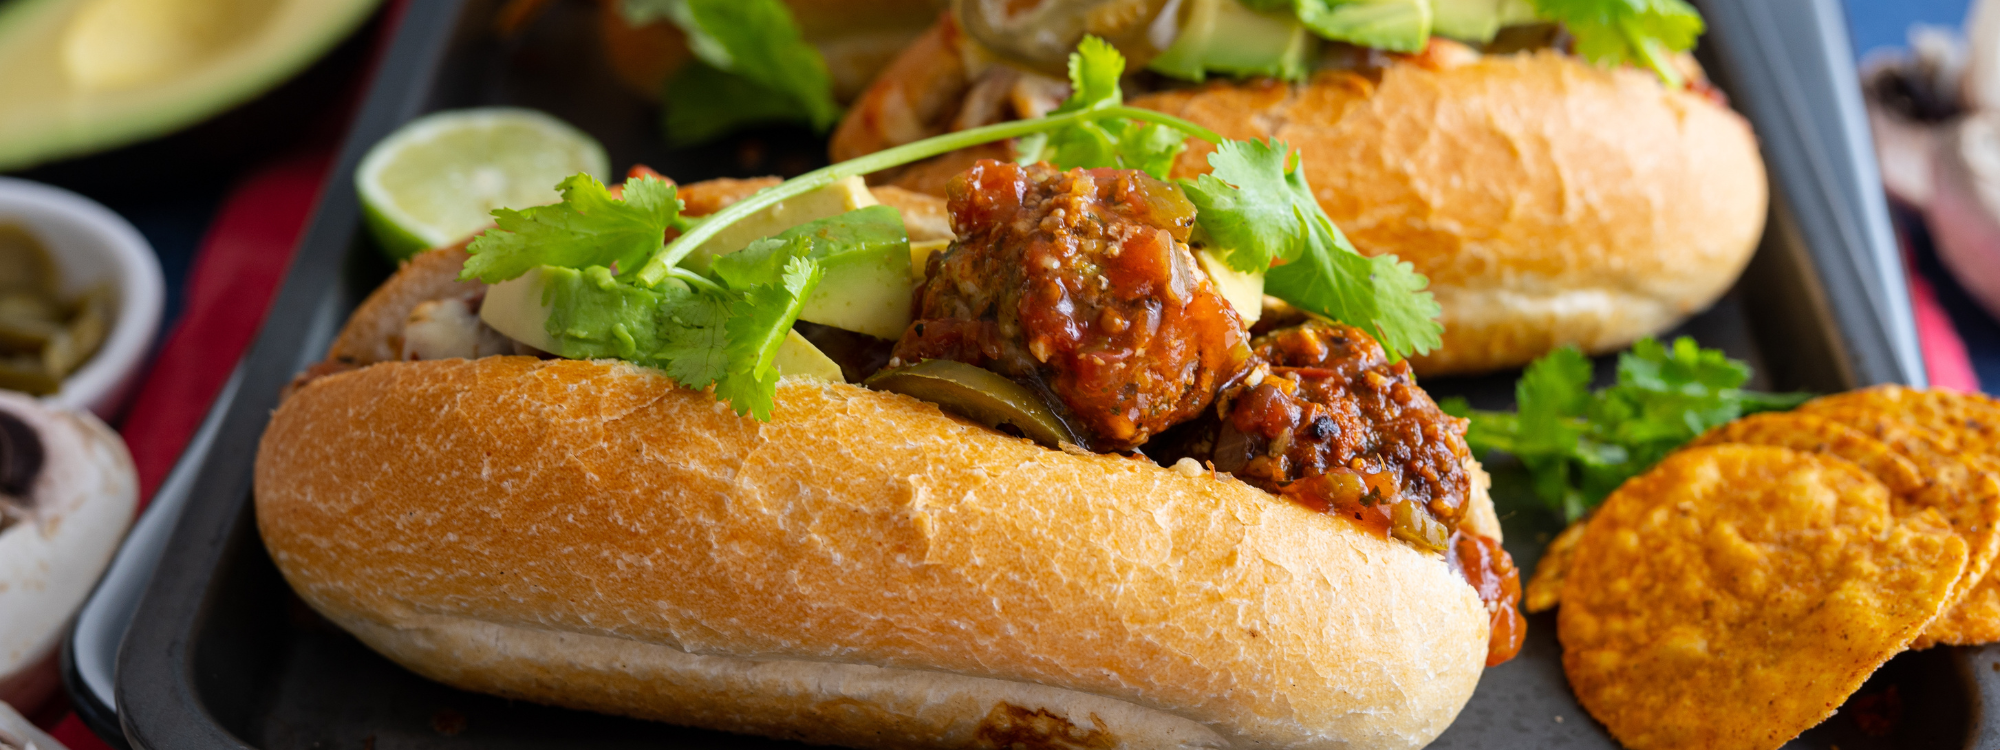 Pork & Mushroom Blended Mexican Meatball Subs_summeredition72